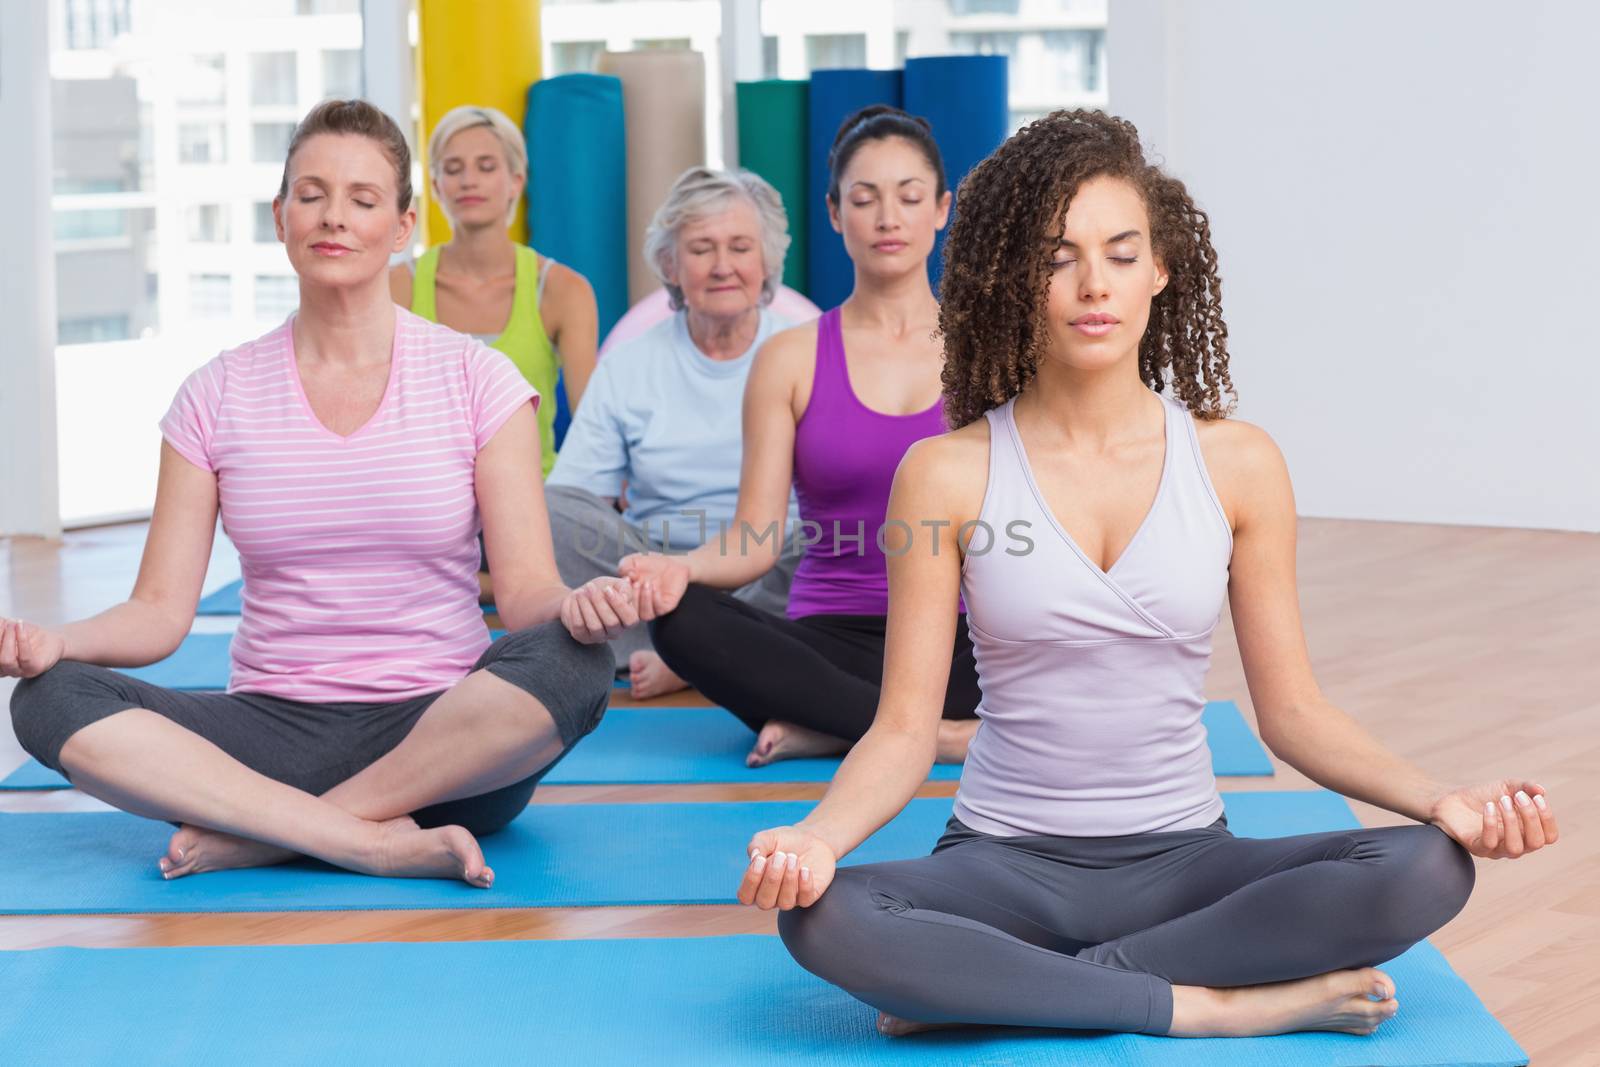 Fit women practicing lotus position in gym class